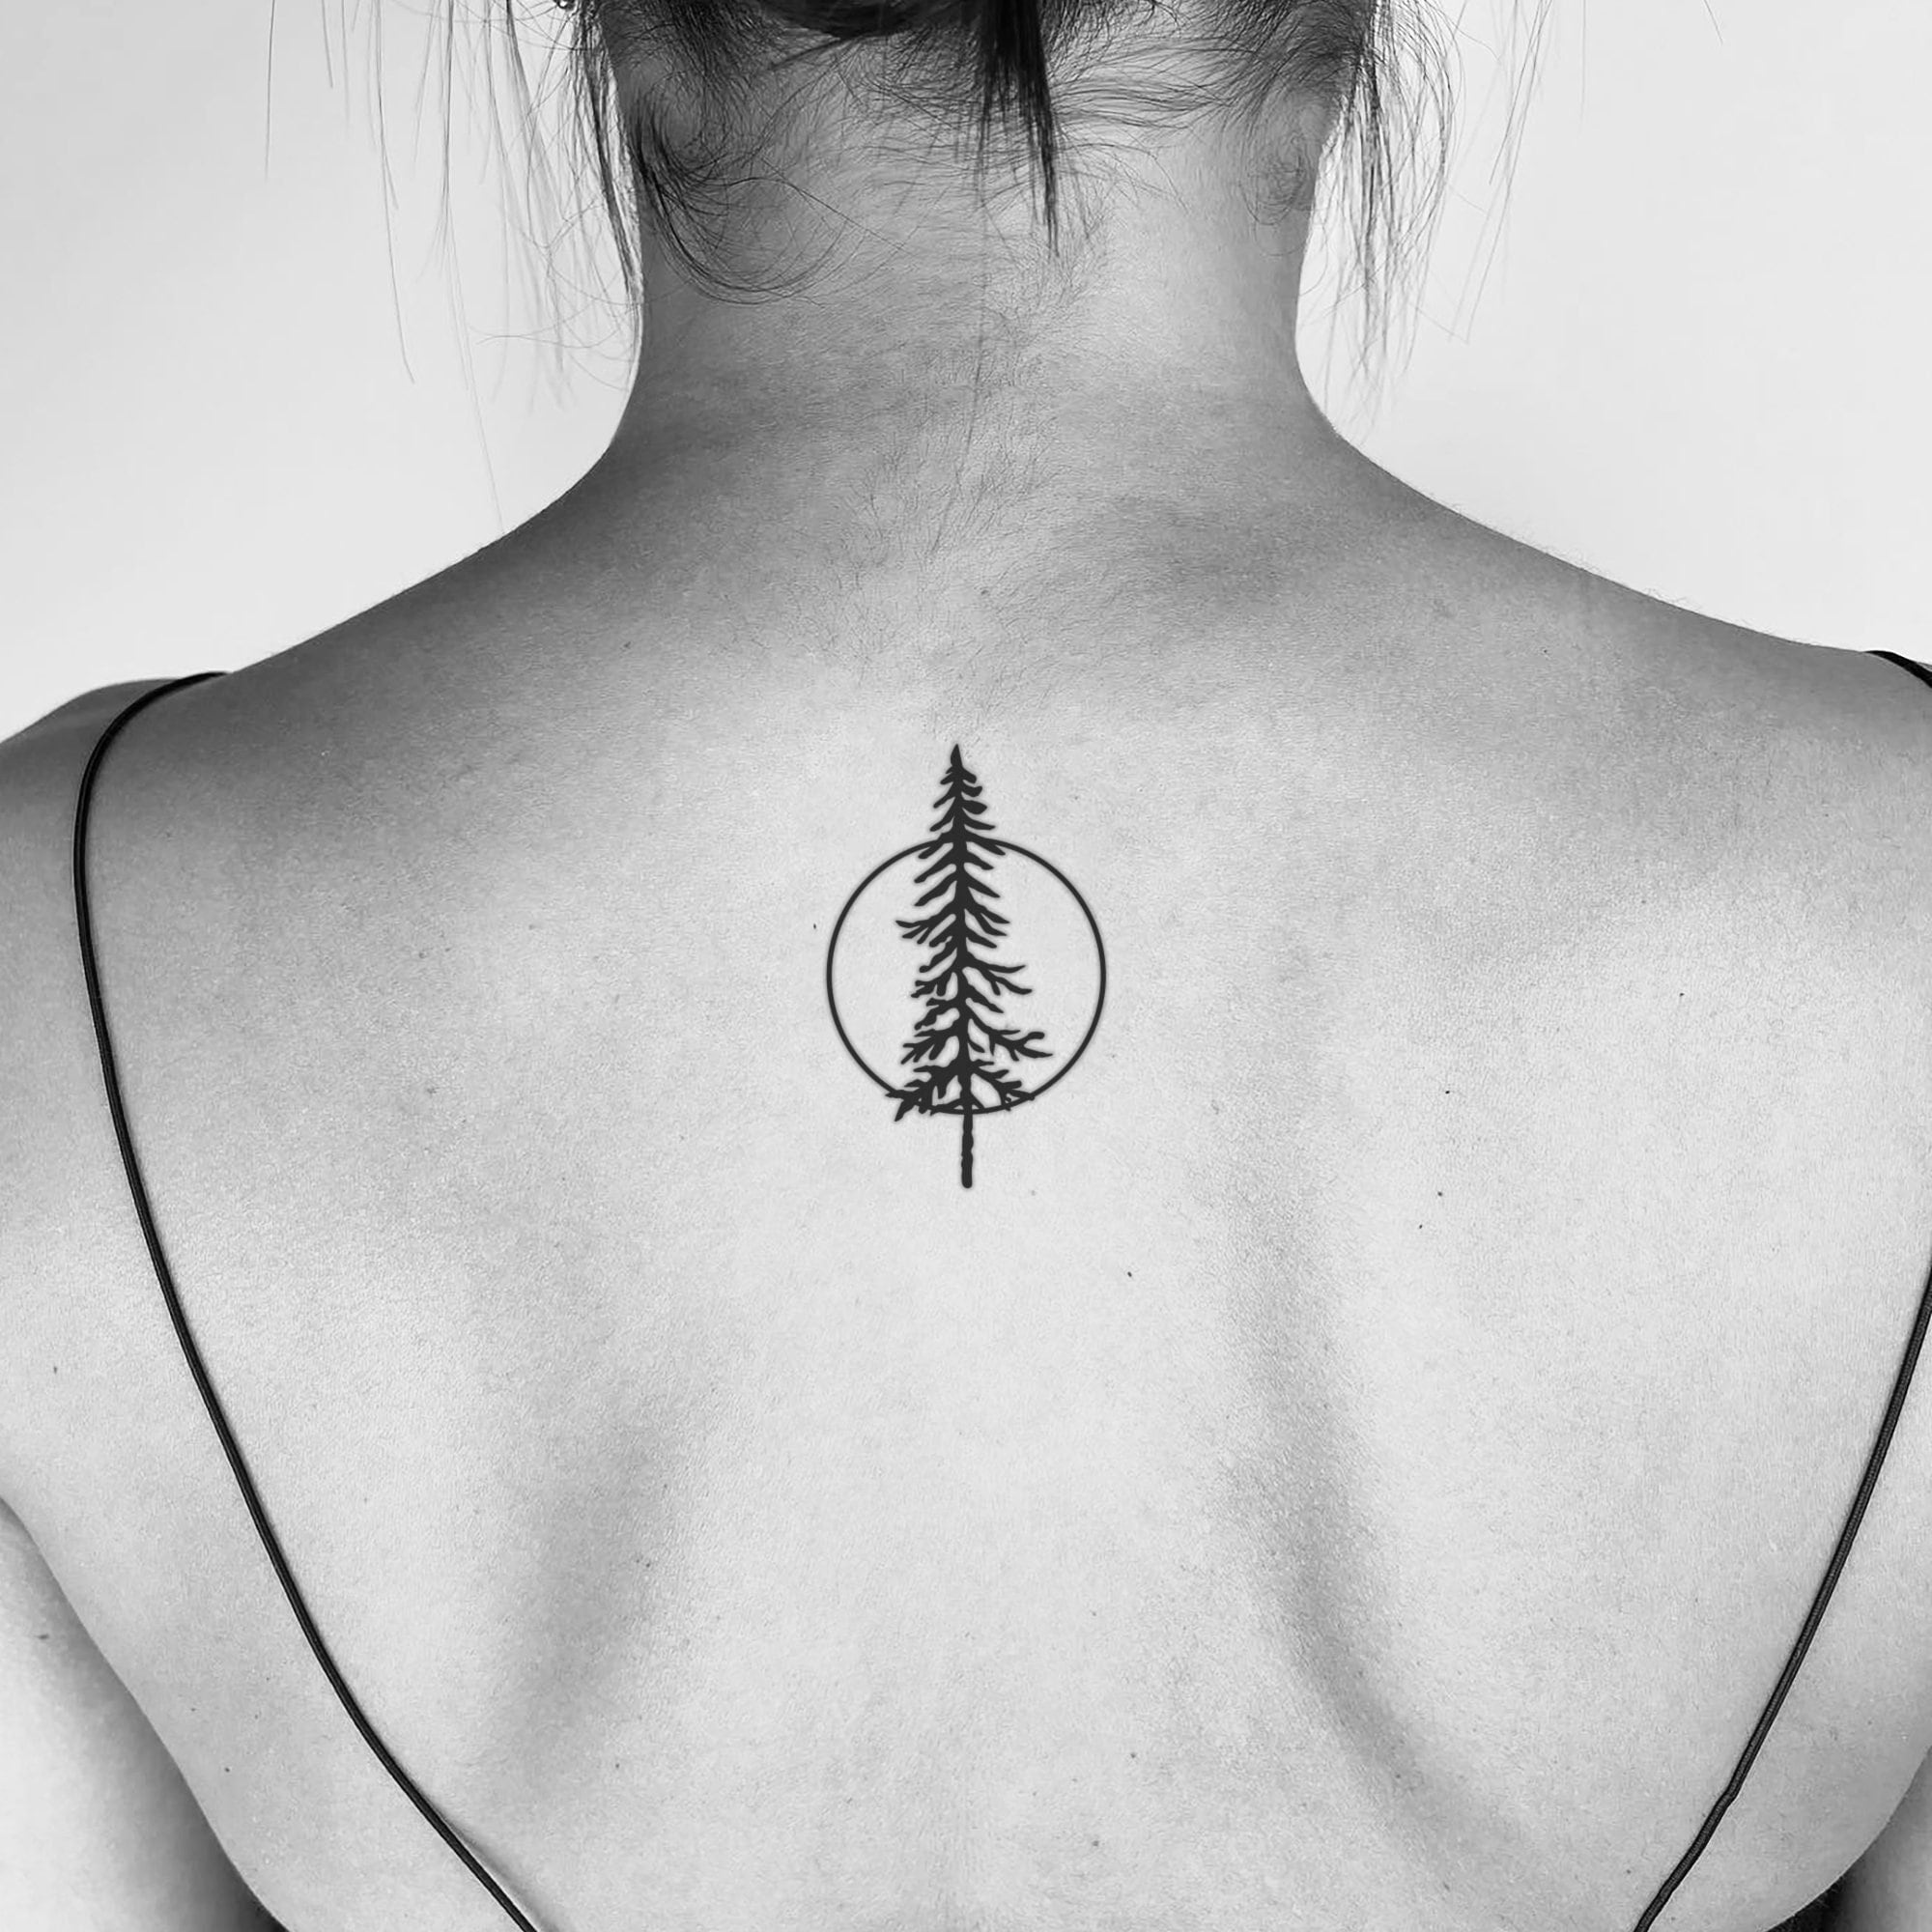 Share 97 about pine tree tattoo super cool  indaotaonec